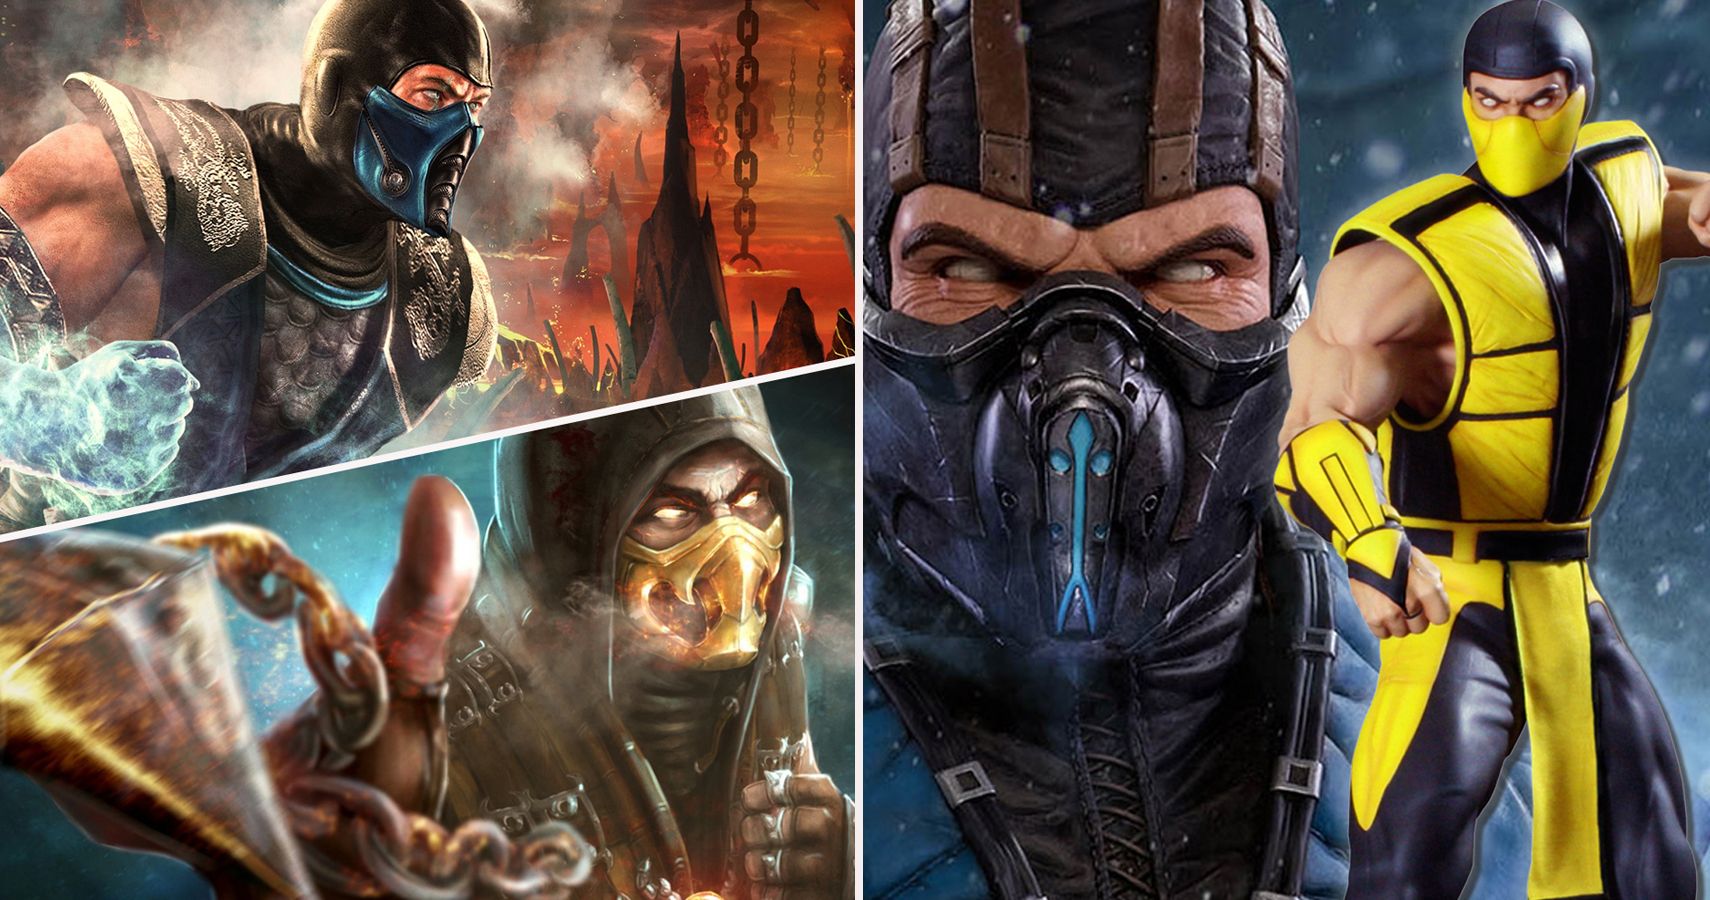 Who is the weakest Mortal Kombat character?